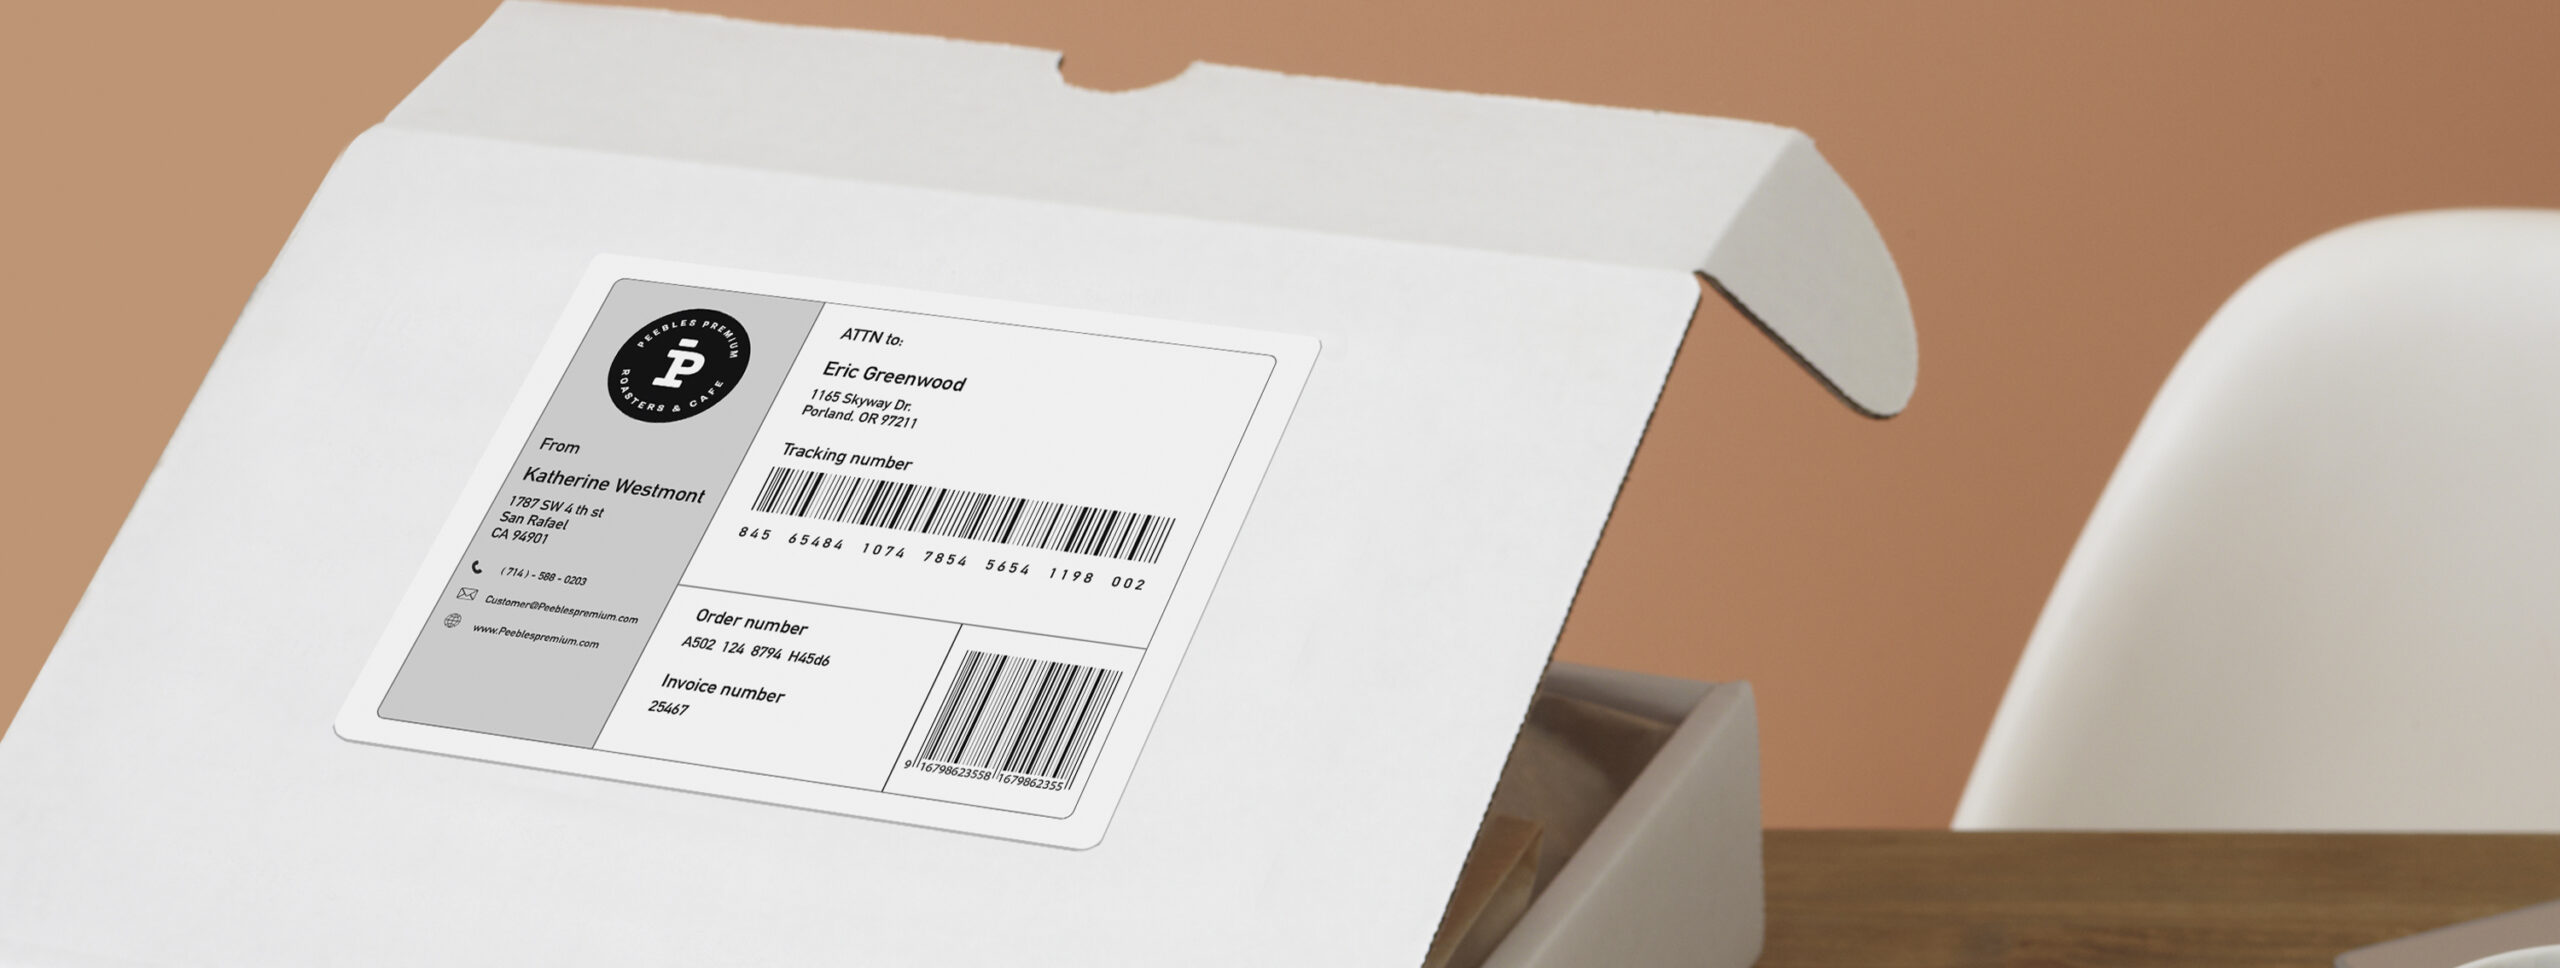 What is a shipping label?